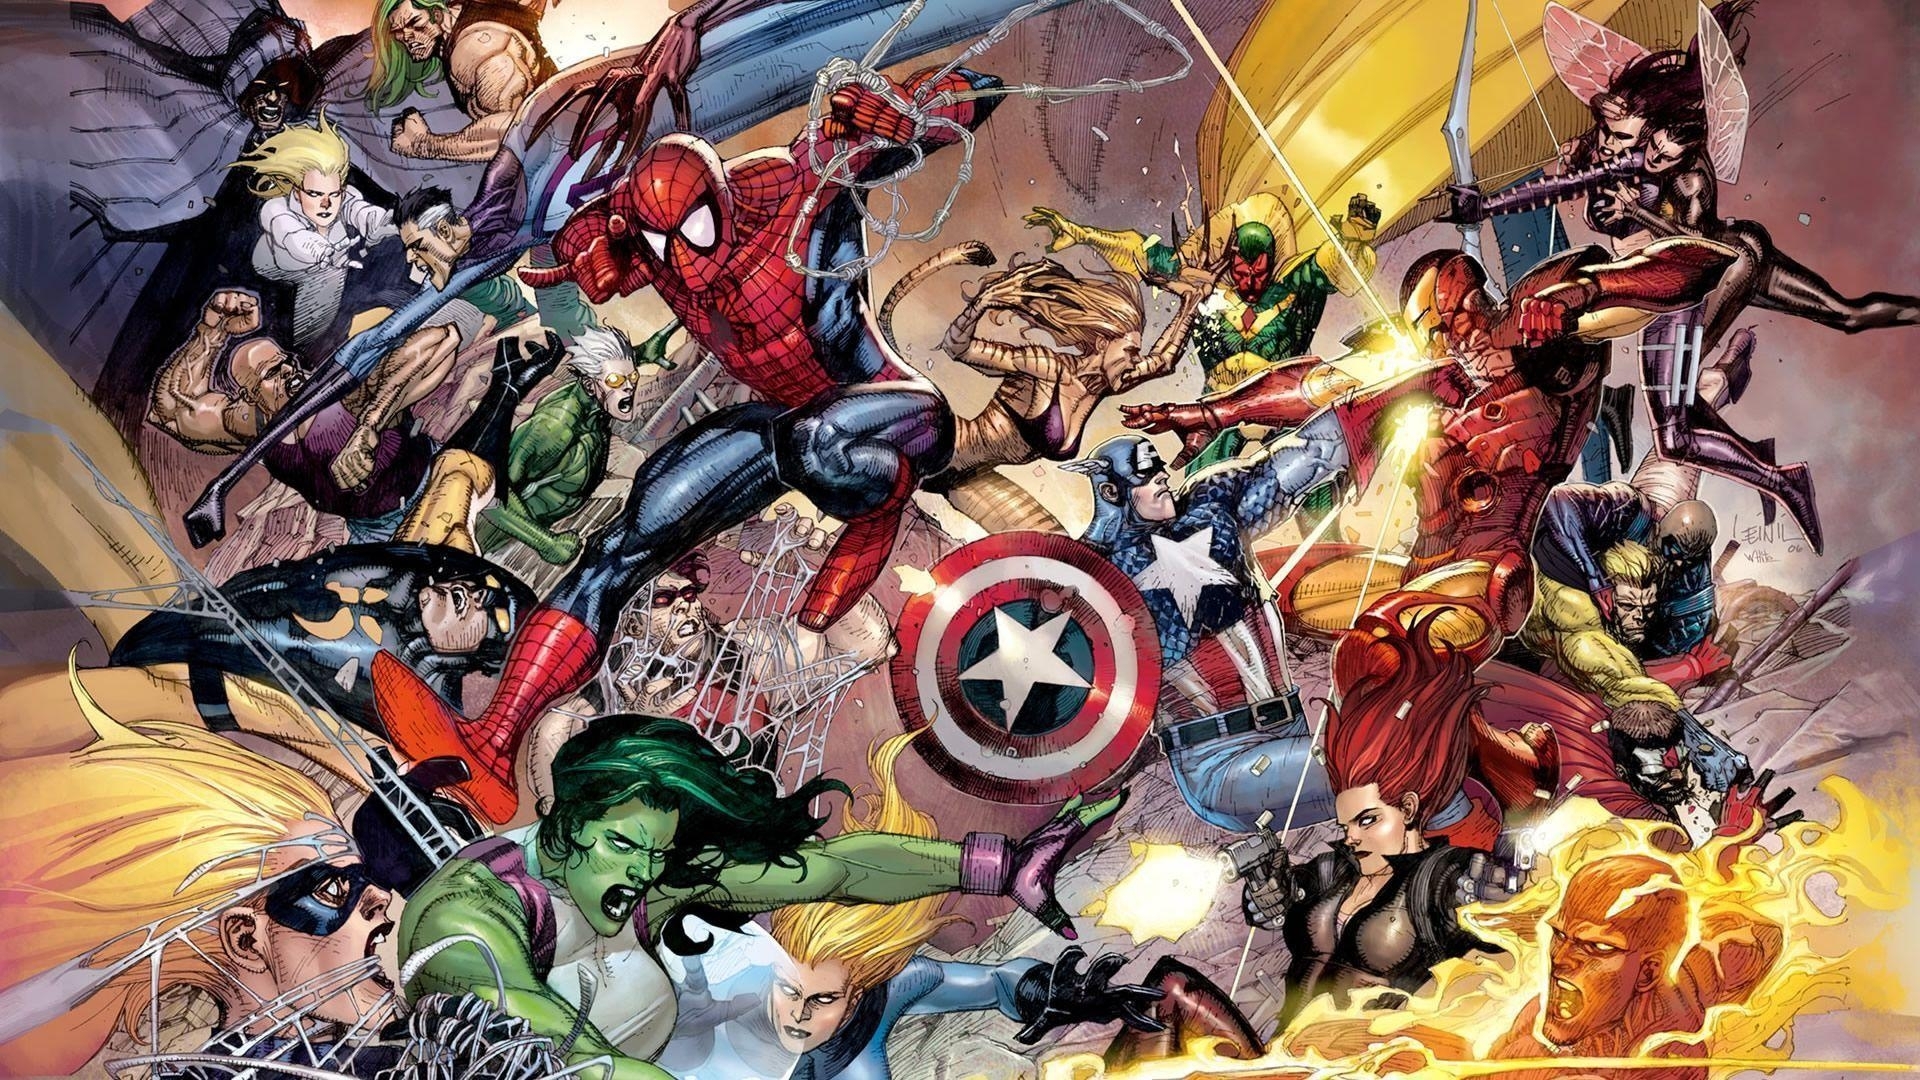 10 Best Hd Comic Book Wallpapers FULL HD 1920×1080 For PC Background